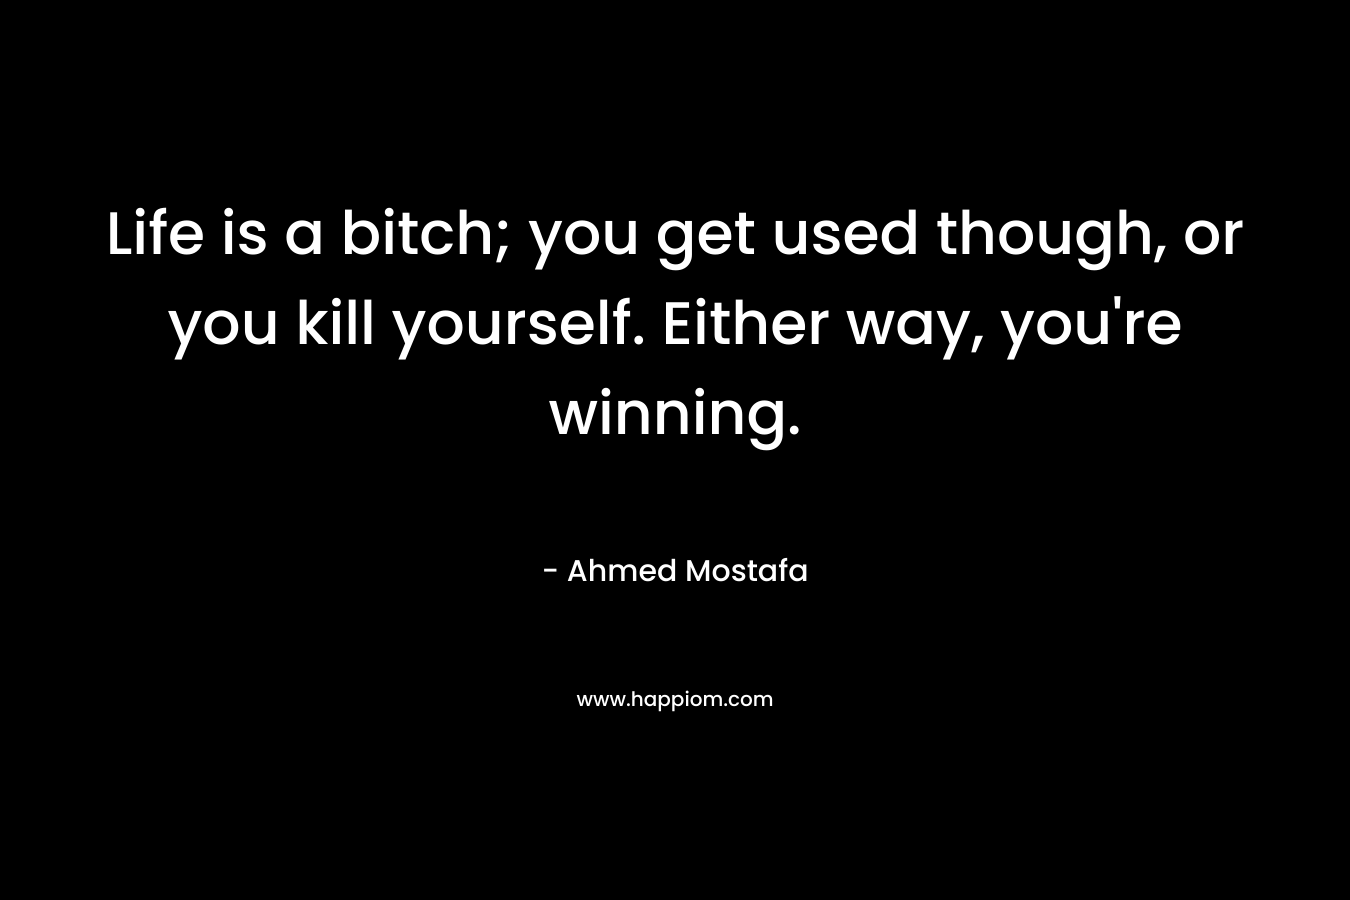 Life is a bitch; you get used though, or you kill yourself. Either way, you're winning.